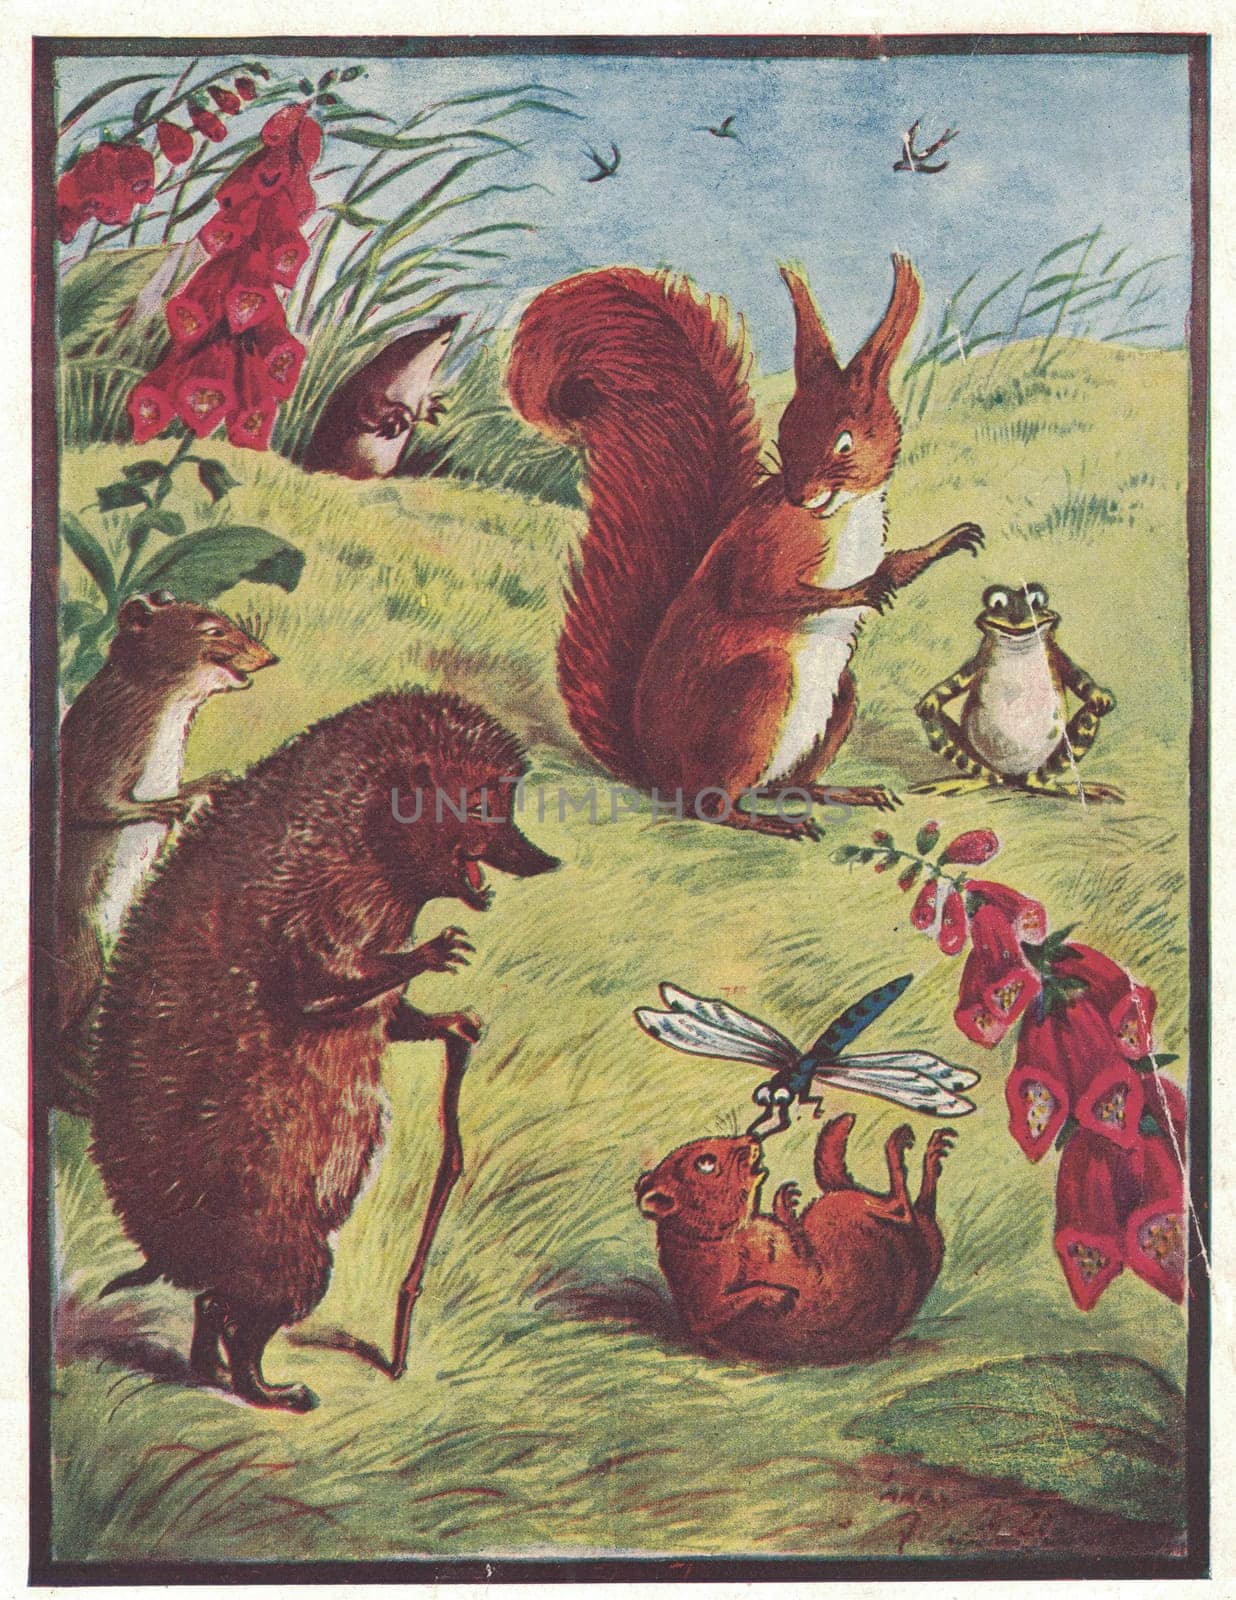 Colorful antique illustration shows an animal family - hedgehog, squirrel, frog on the meadow. Vintage drawing shows an aniamal family - hedgehog, squirrel, frog on the meadow. Storybook illustration published 1910 by roman_nerud